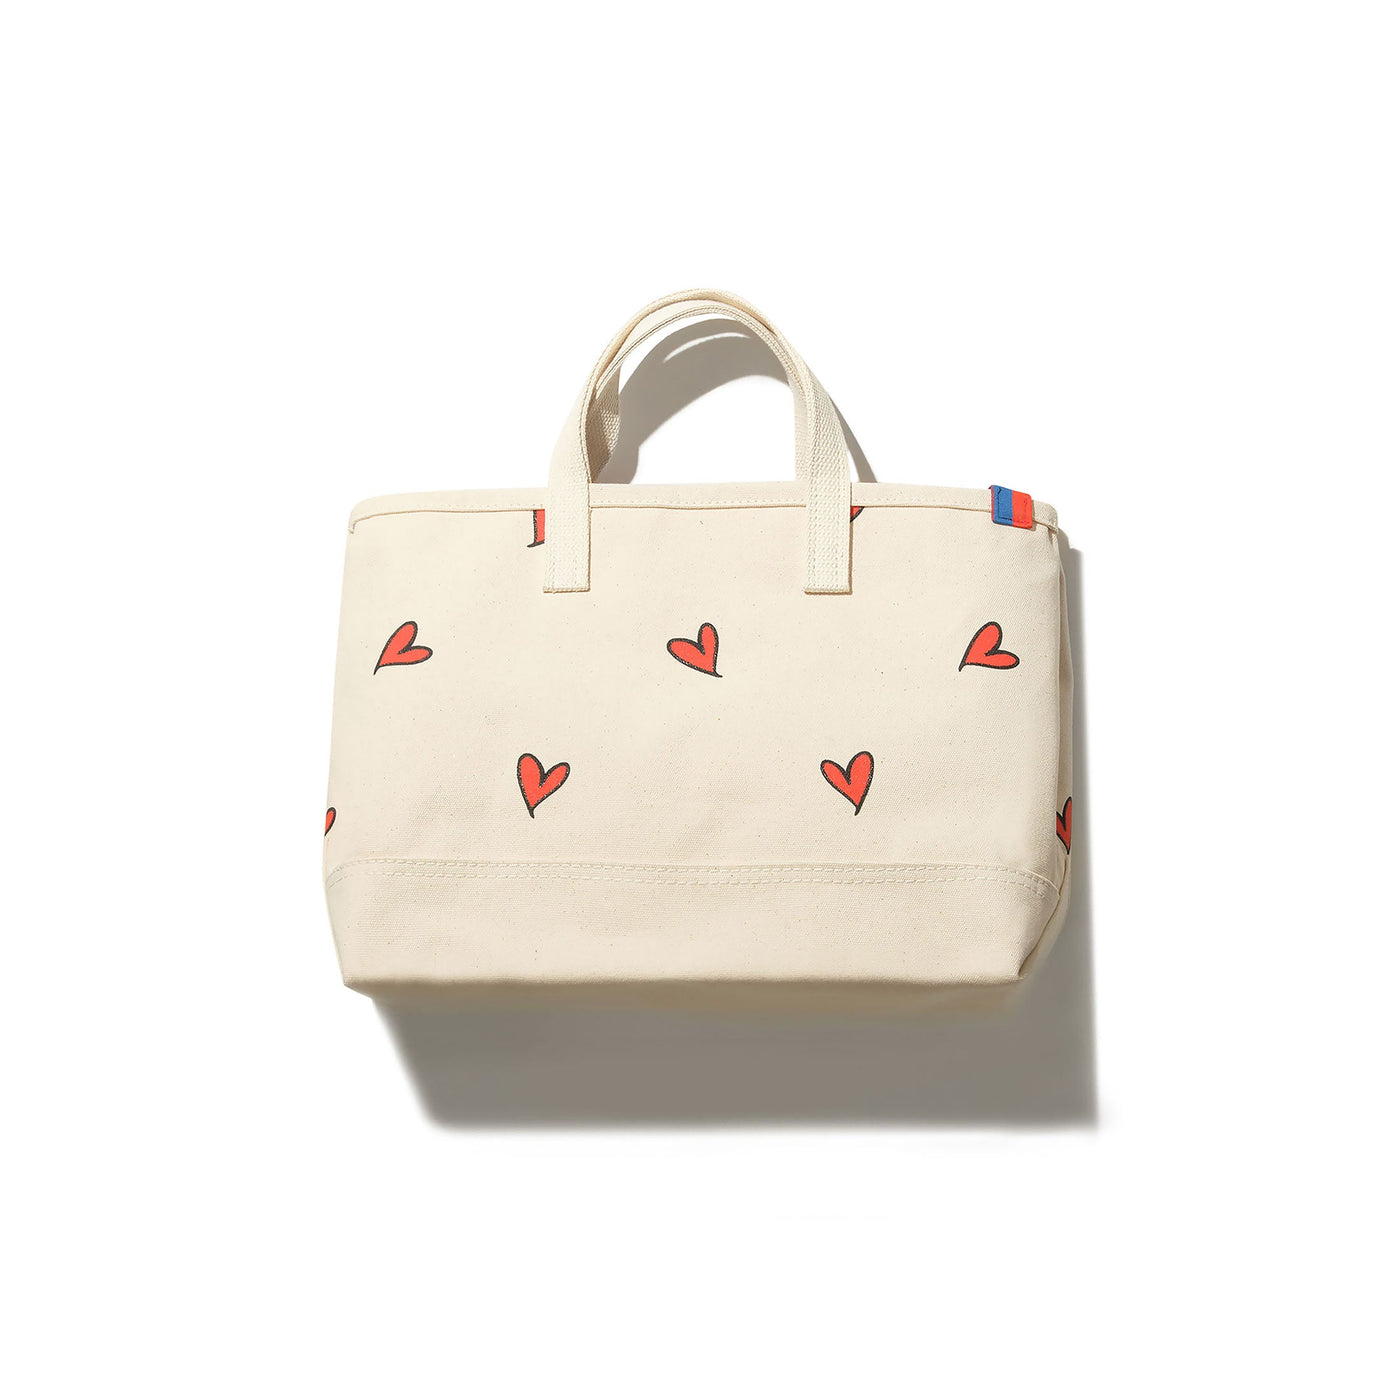 The All Over Heart Medium Tote